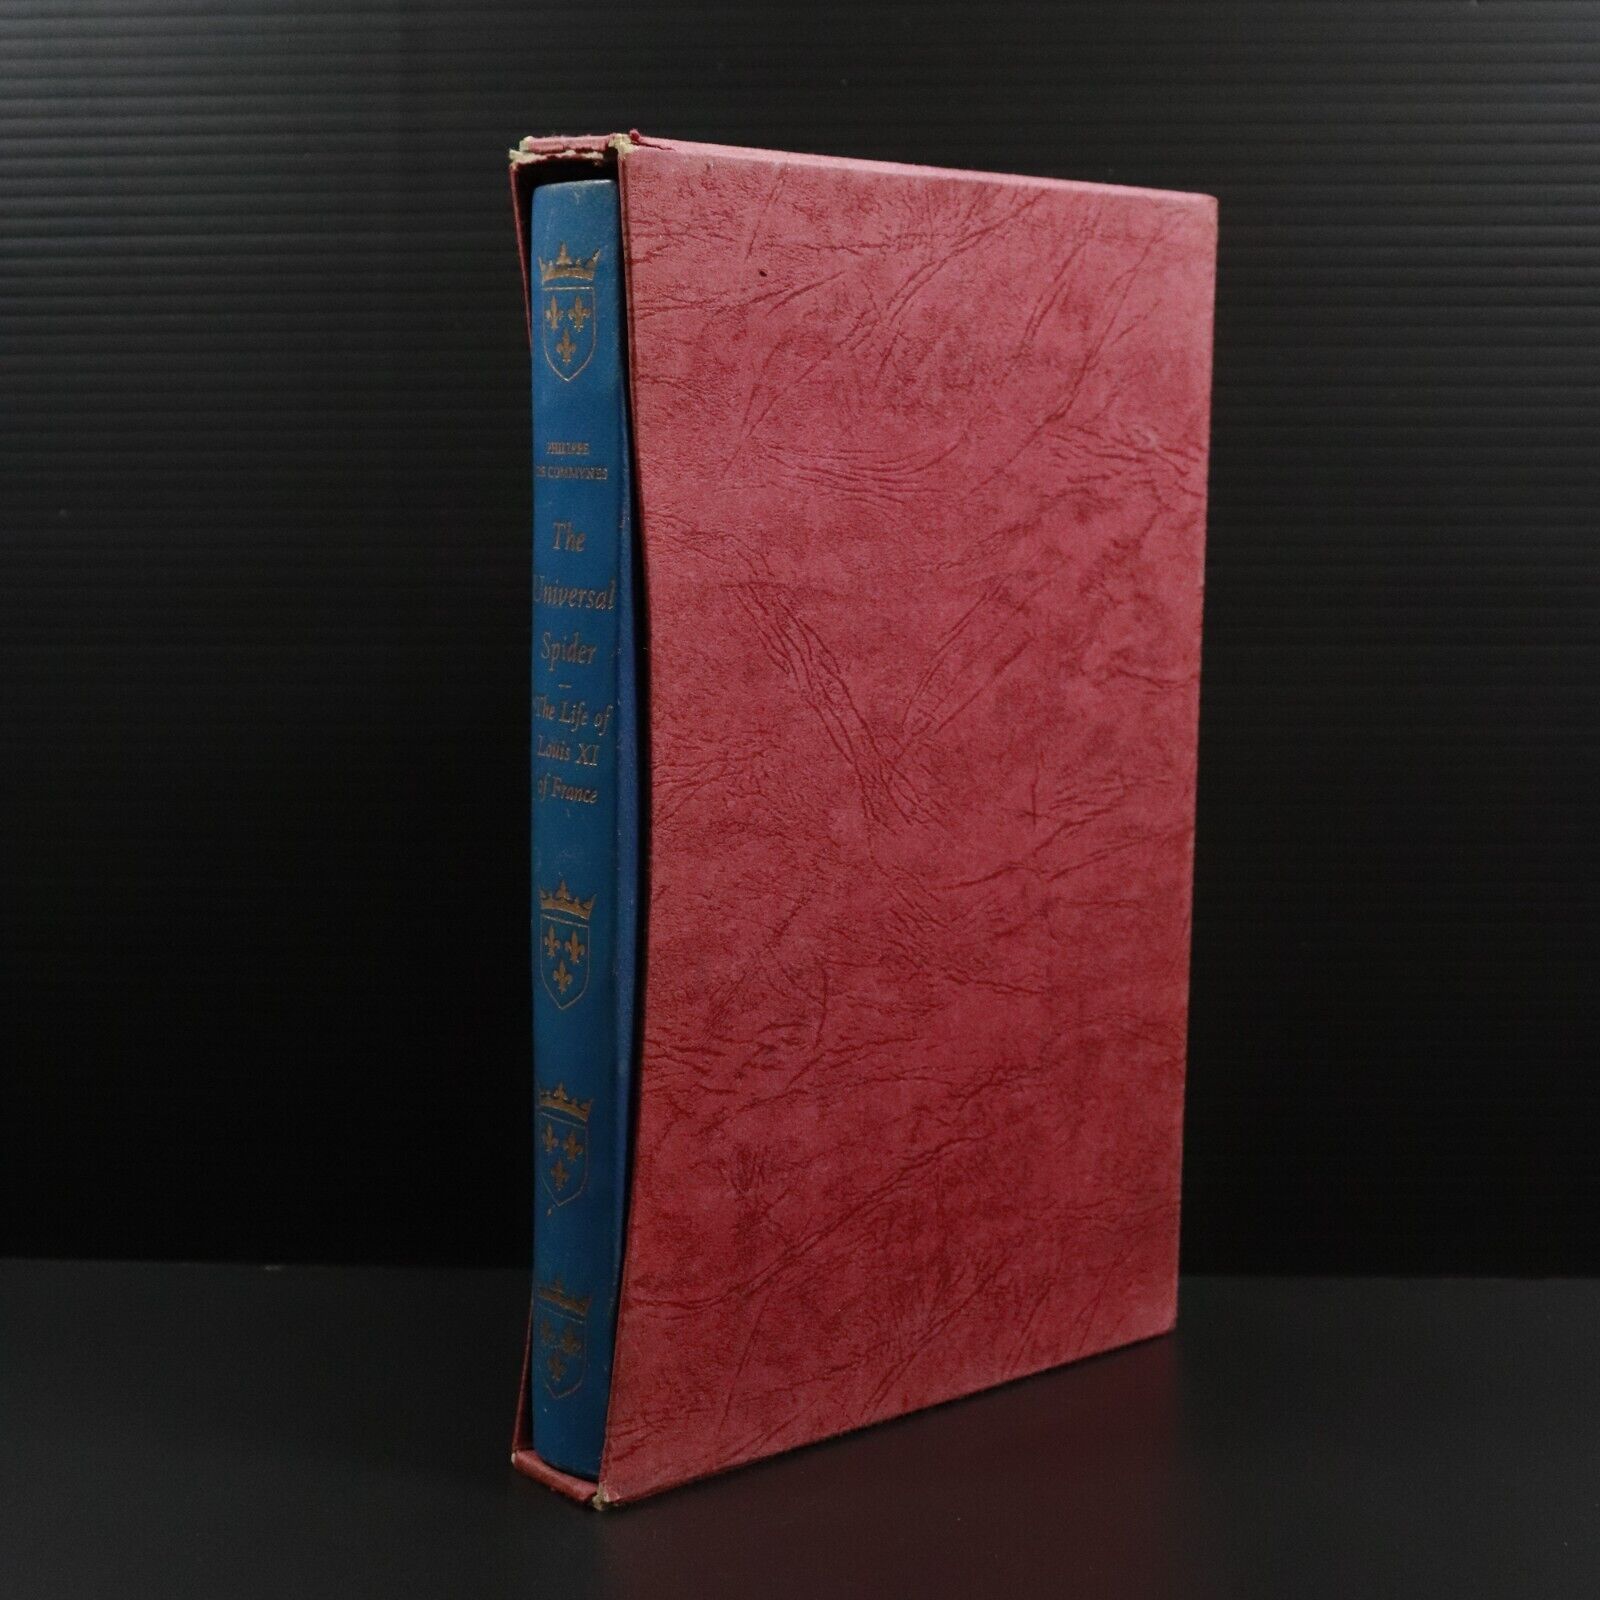 1973 The Universal Spider: Life of Louis XI of France Folio Society History Book